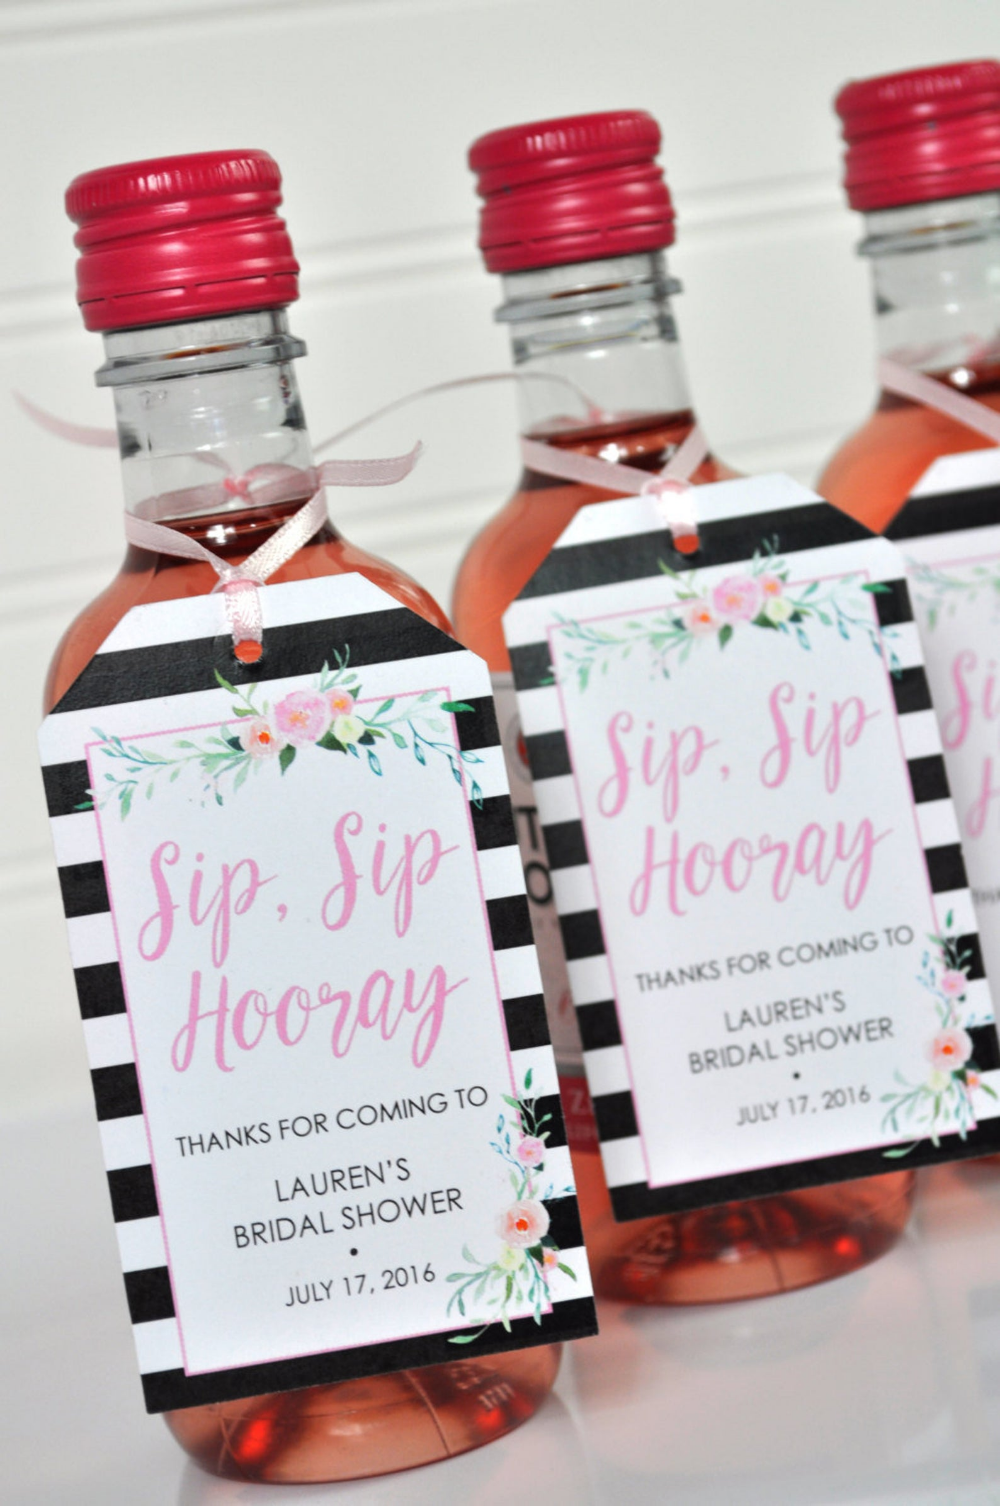 Bridal Shower Favors Tags for Mini Wine Bottles, Wedding Favors, Mini Champagne Tags, Personalized Wedding Tags, Black Floral - Set of 12 -   15 Event Planning Names wine bottles ideas